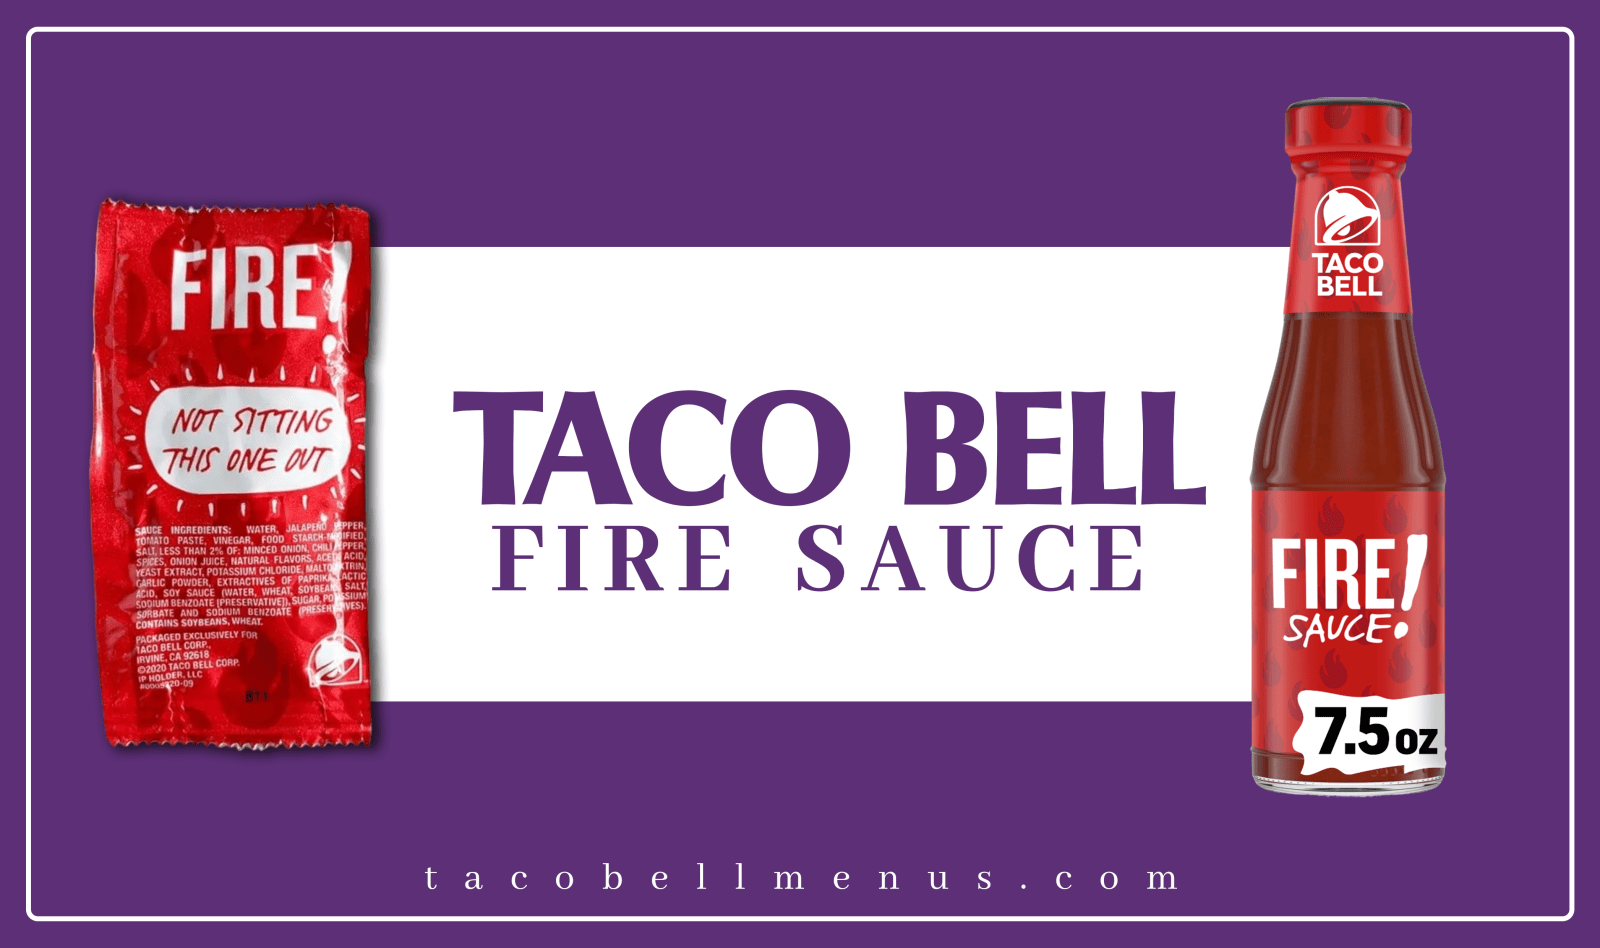 Taco Bell Fire Sauce, Taco Bell hot sauce, Spicy sauce, Fire Sauce ingredients, Taco Bell sauce flavors, Taco Bell fire sauce recipes, Taco Bell fire sauce nutrition, Taco Bell fire sauce price